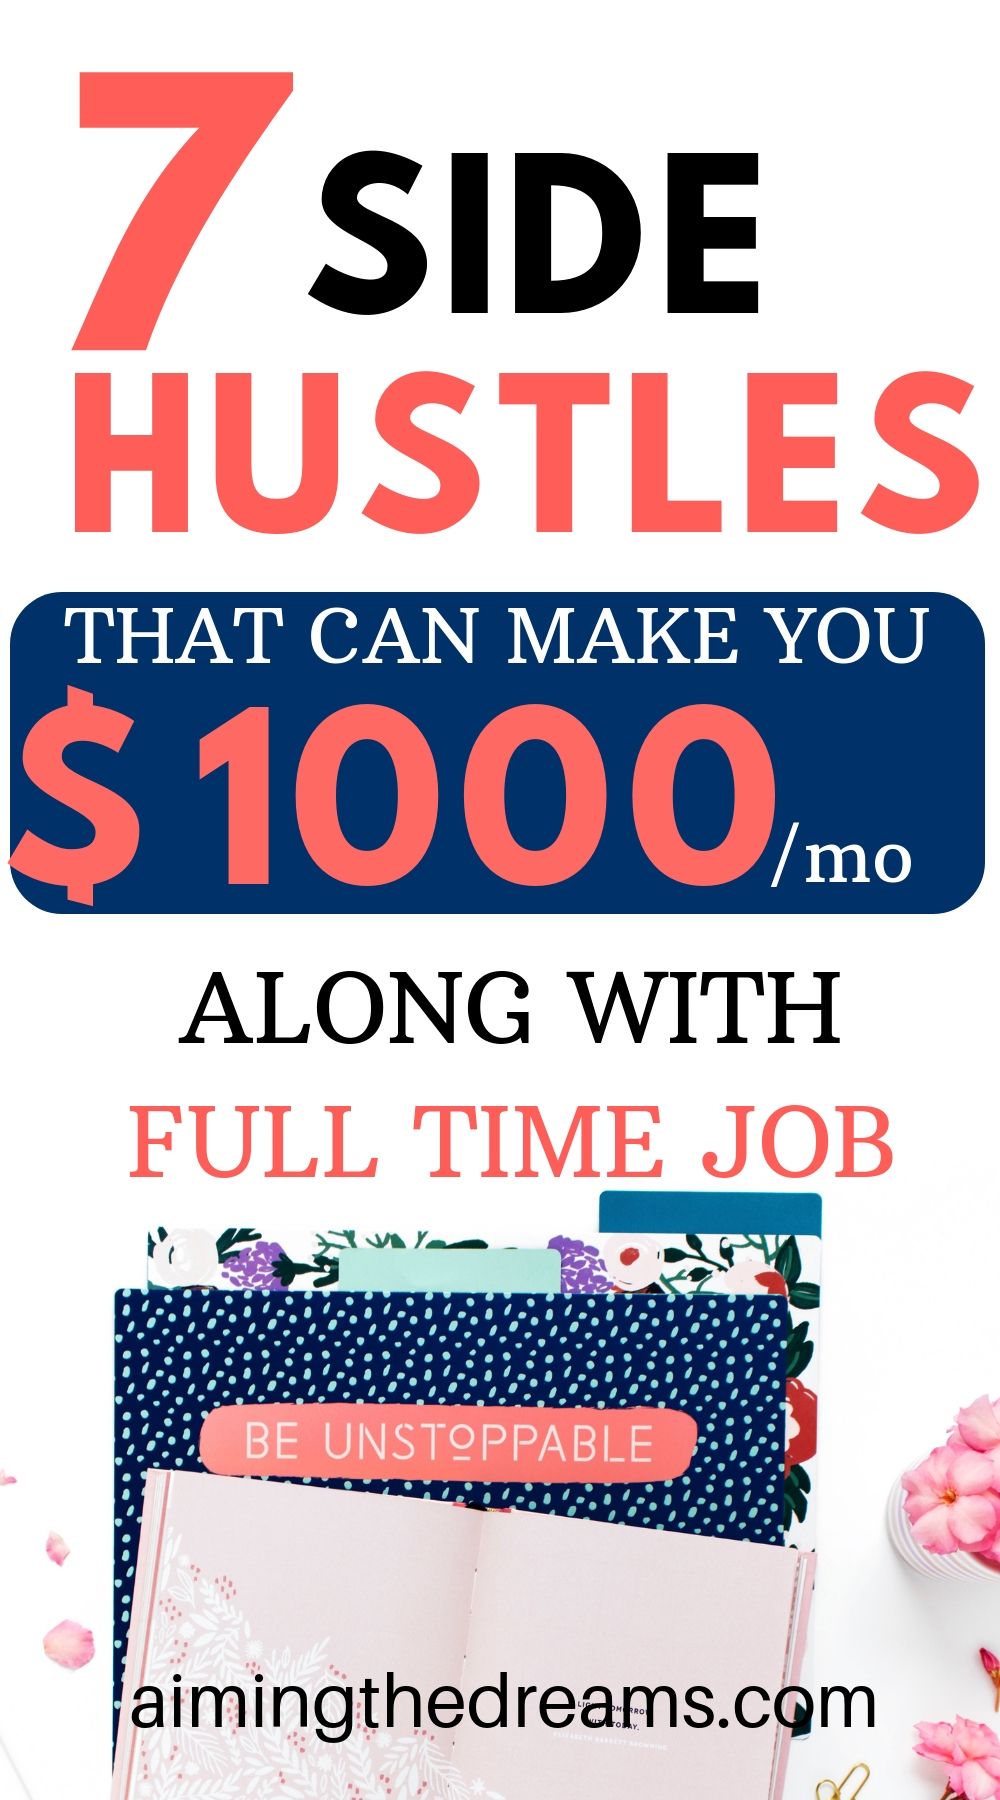 7 side hustles to make you $1000 every month